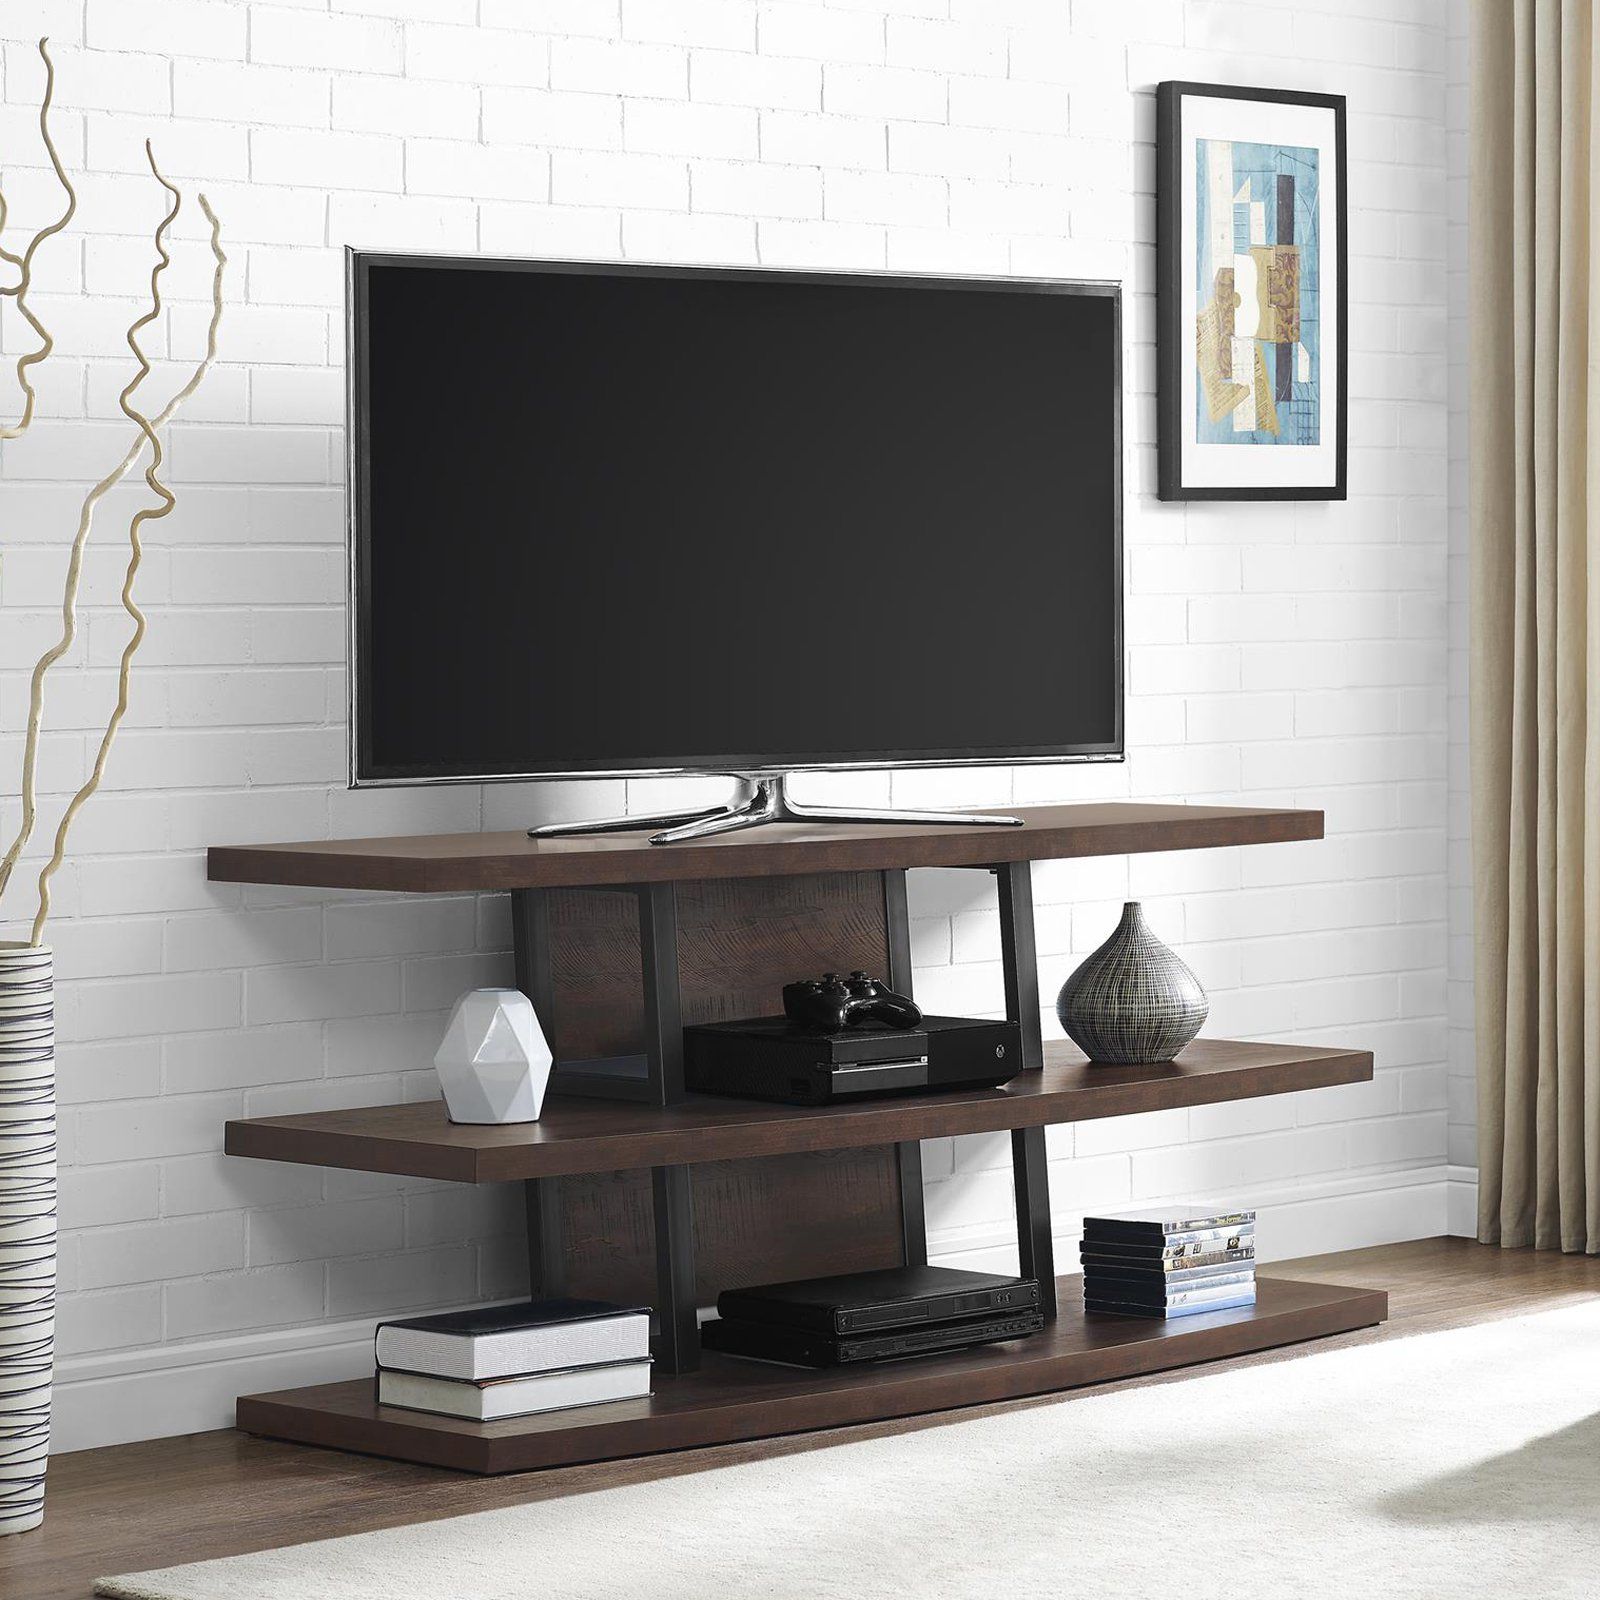 Ameriwood Home Castling Tv Stand For Tvs Up To 55", Espresso Pertaining To Forma 65 Inch Tv Stands (View 25 of 30)